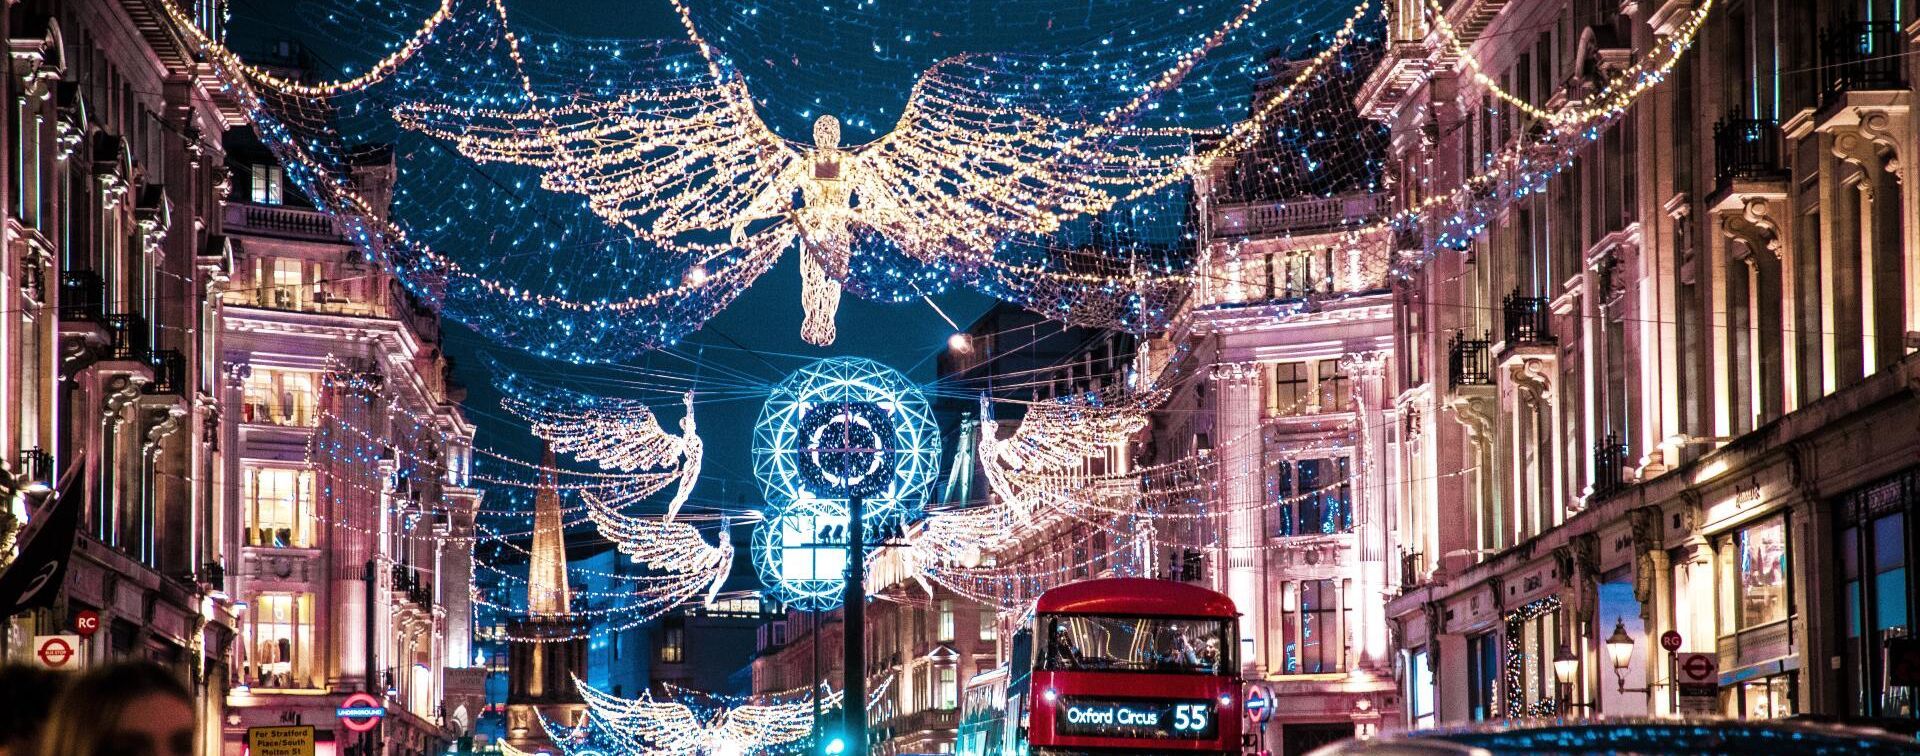 Christmas lights over a busy road, angels and snow globes